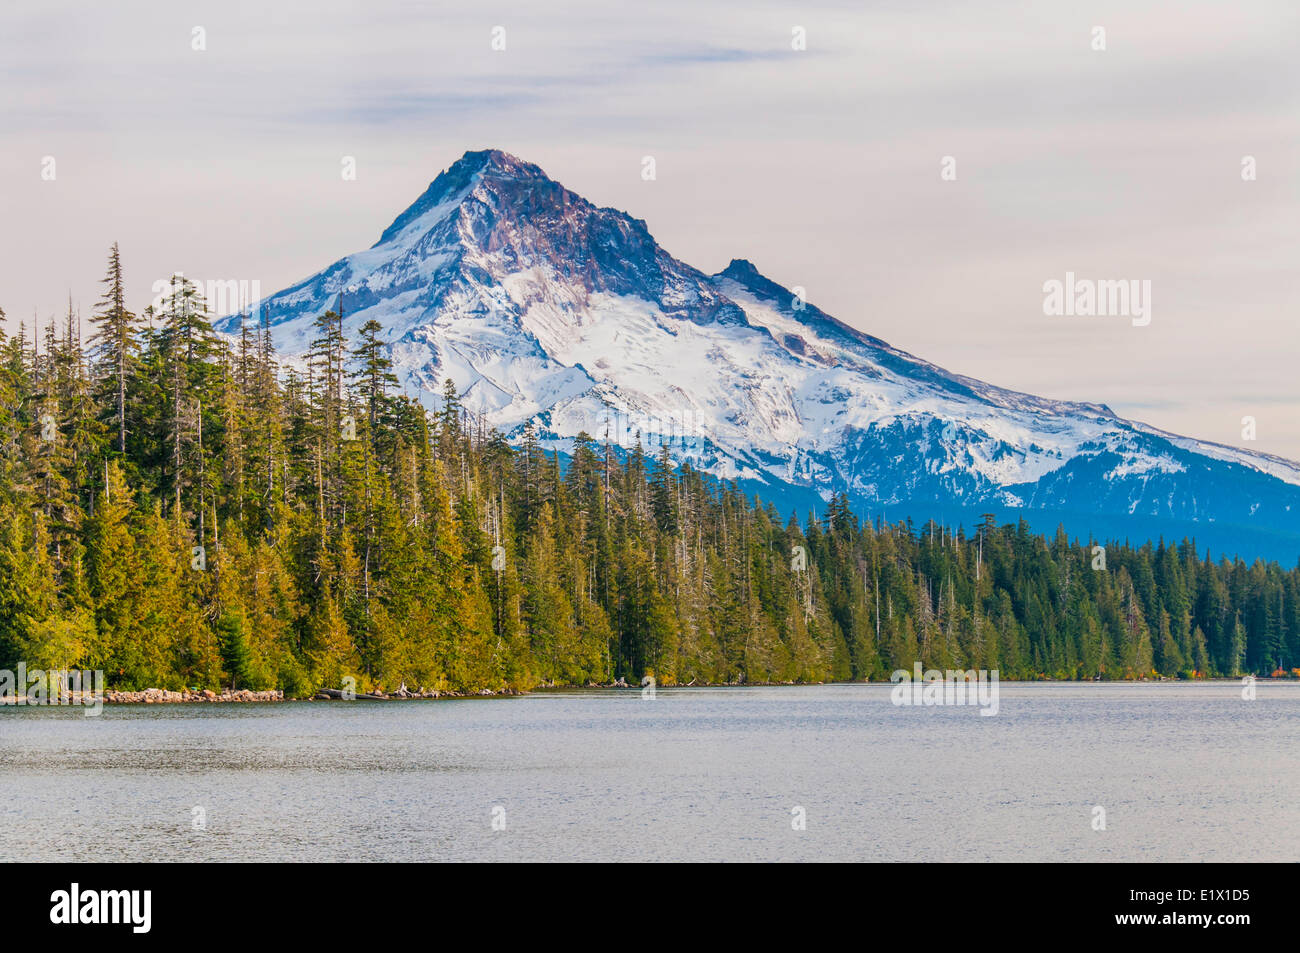 Trillium Lake is a lake situated 7.5 miles (12.1 km) south-southwest Mount Hood in the U.S. state Oregon.View Mount Hood in Stock Photo